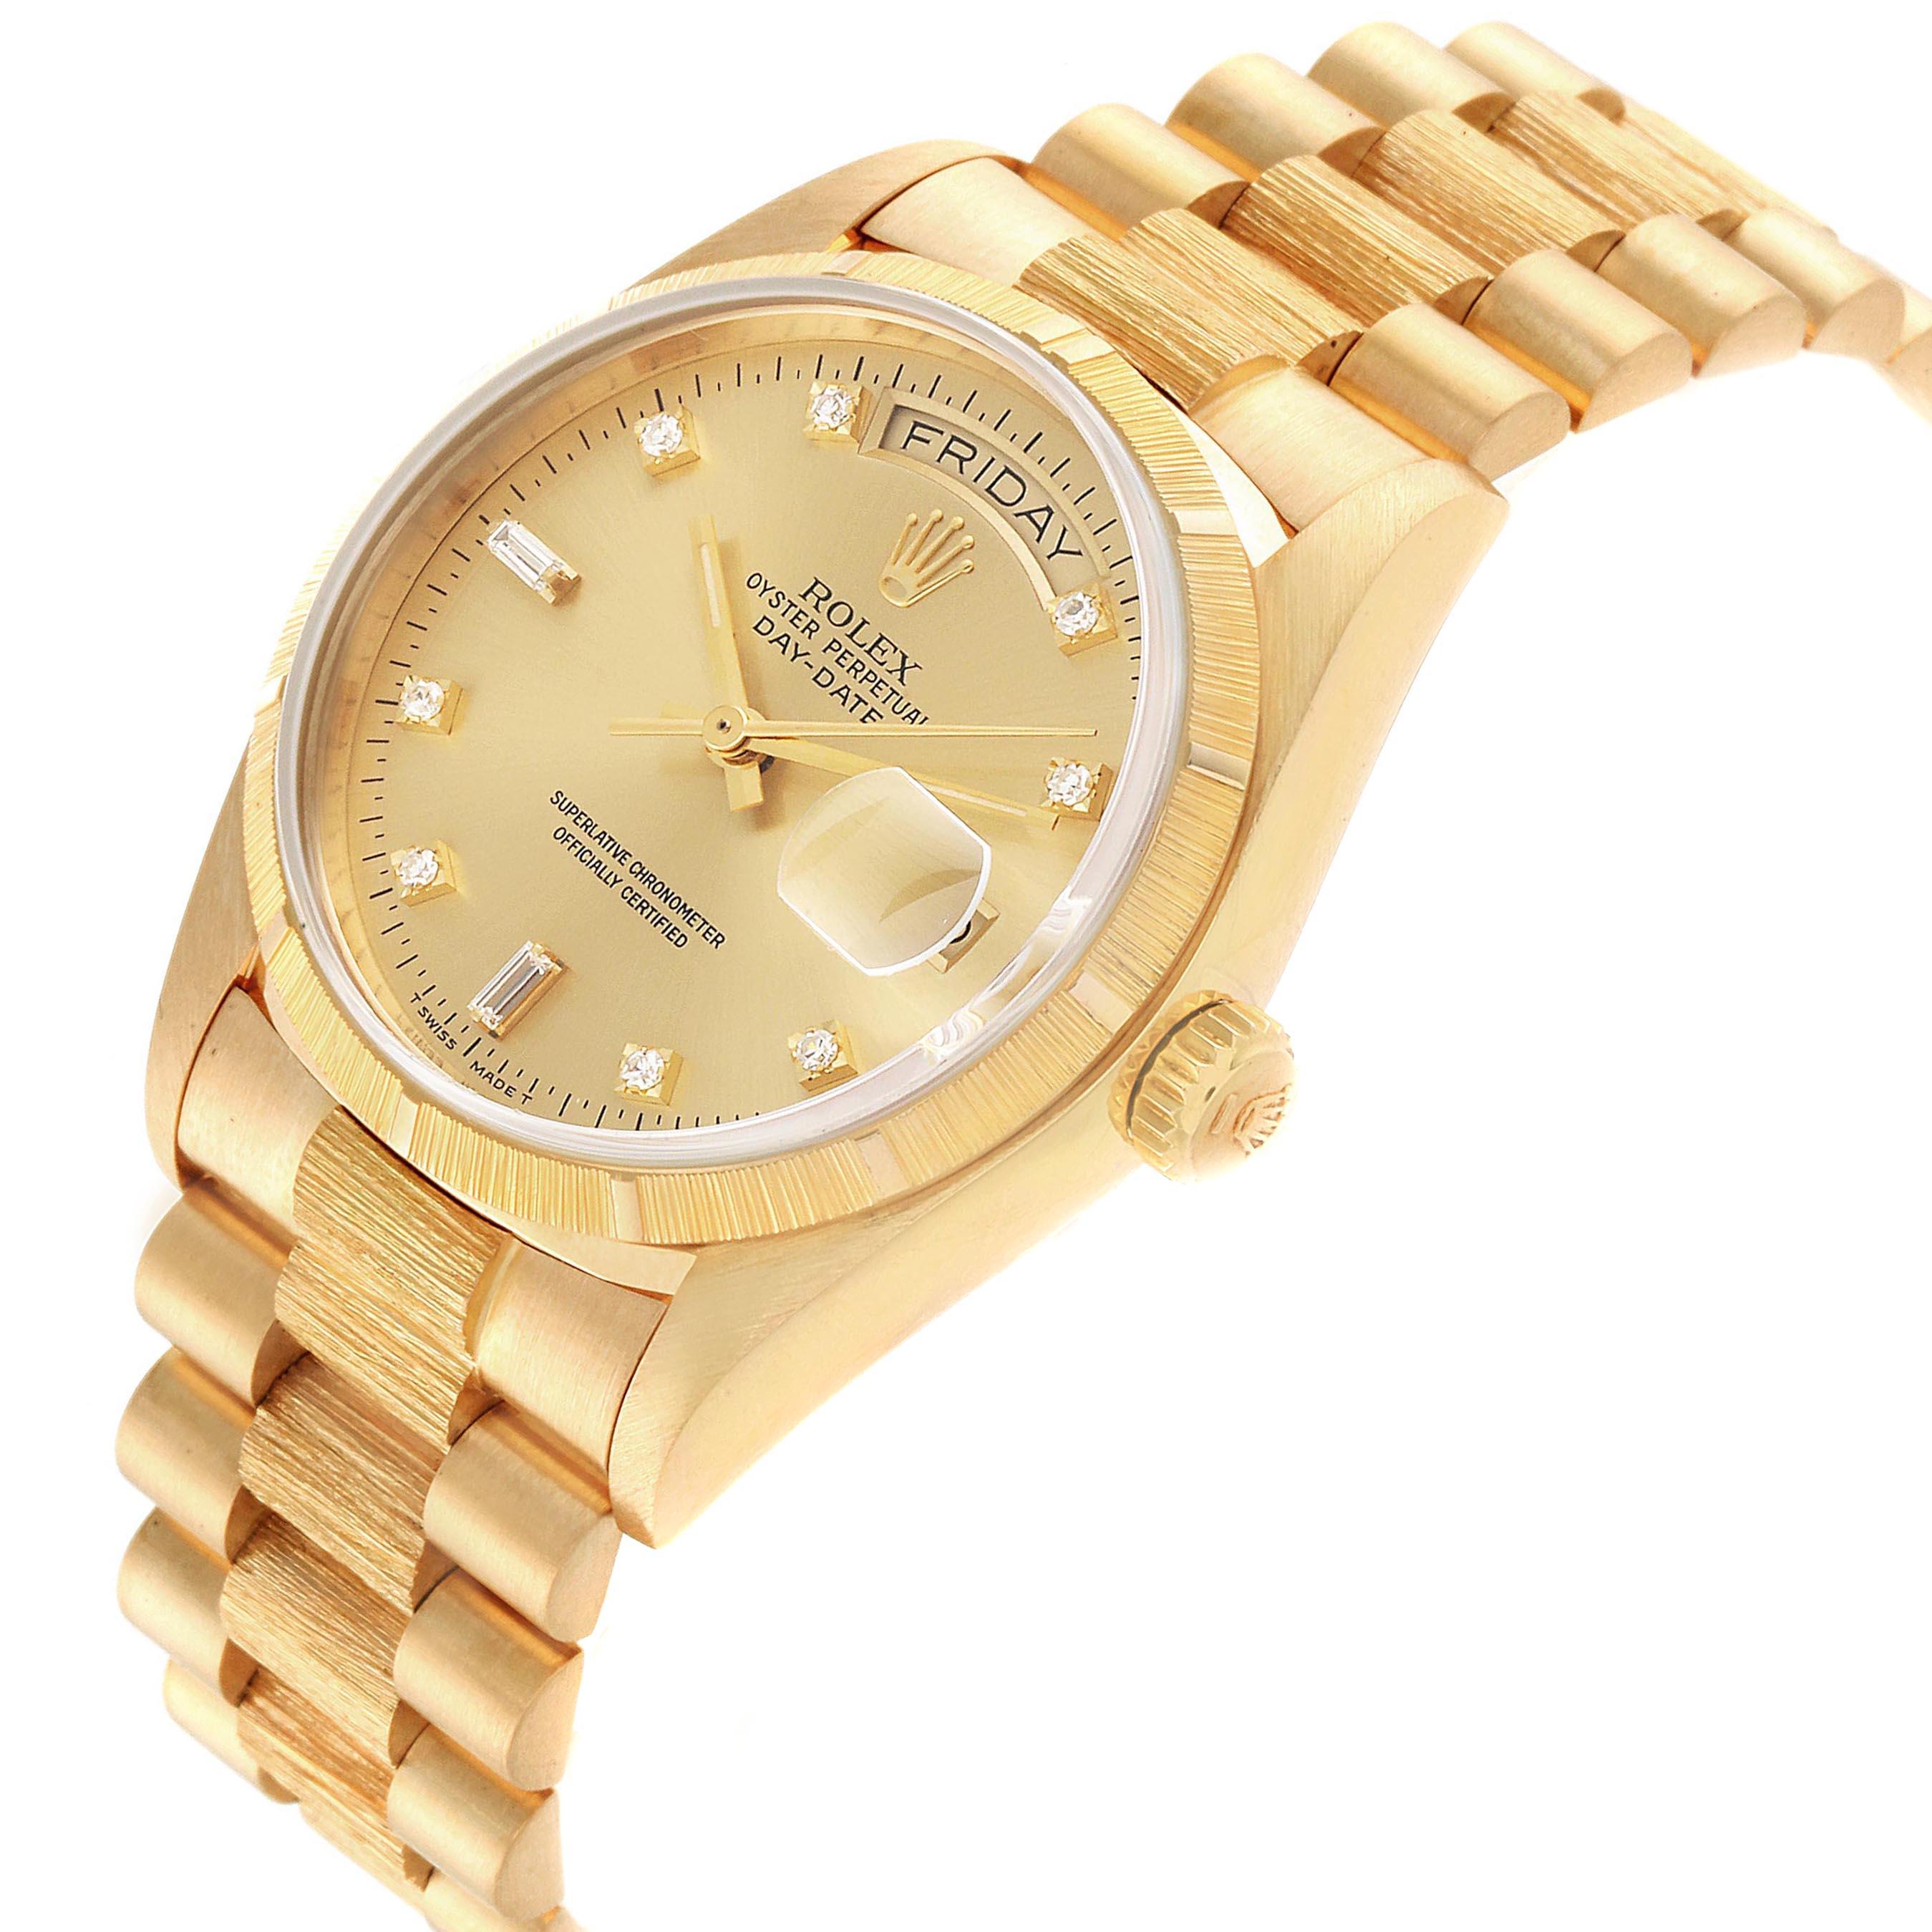 Rolex President Day-Date Yellow Gold Bark Finish Diamond Men's Watch 18078 In Excellent Condition For Sale In Atlanta, GA